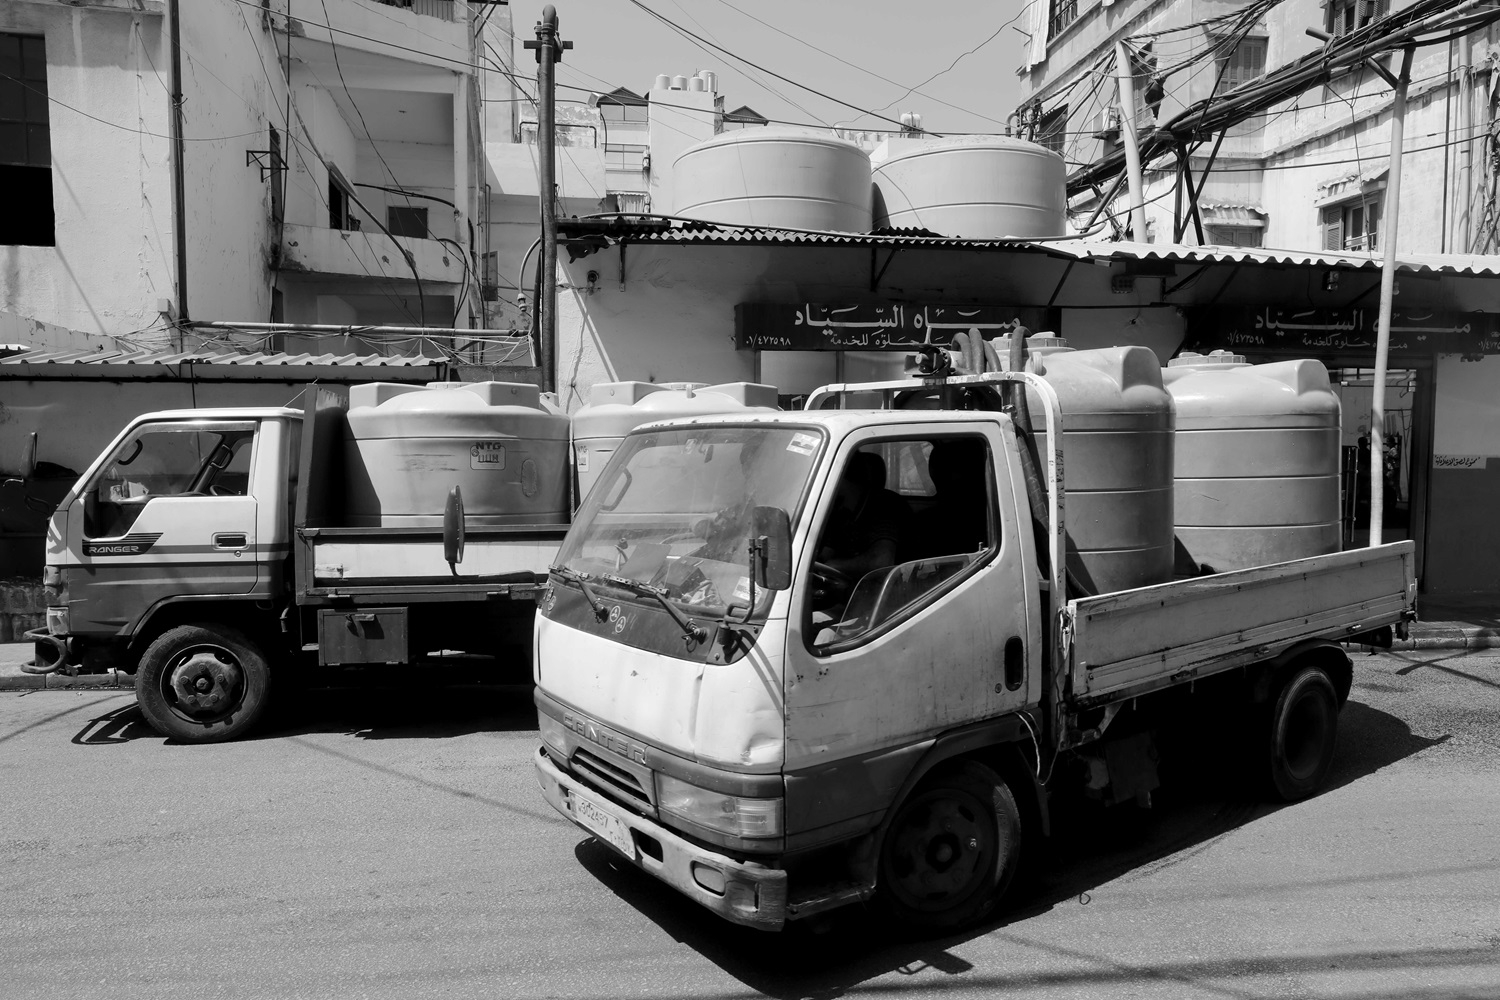 A pickup truck with plastic tanks loaded on its back is parked in front of a well called "al-Siyyad."